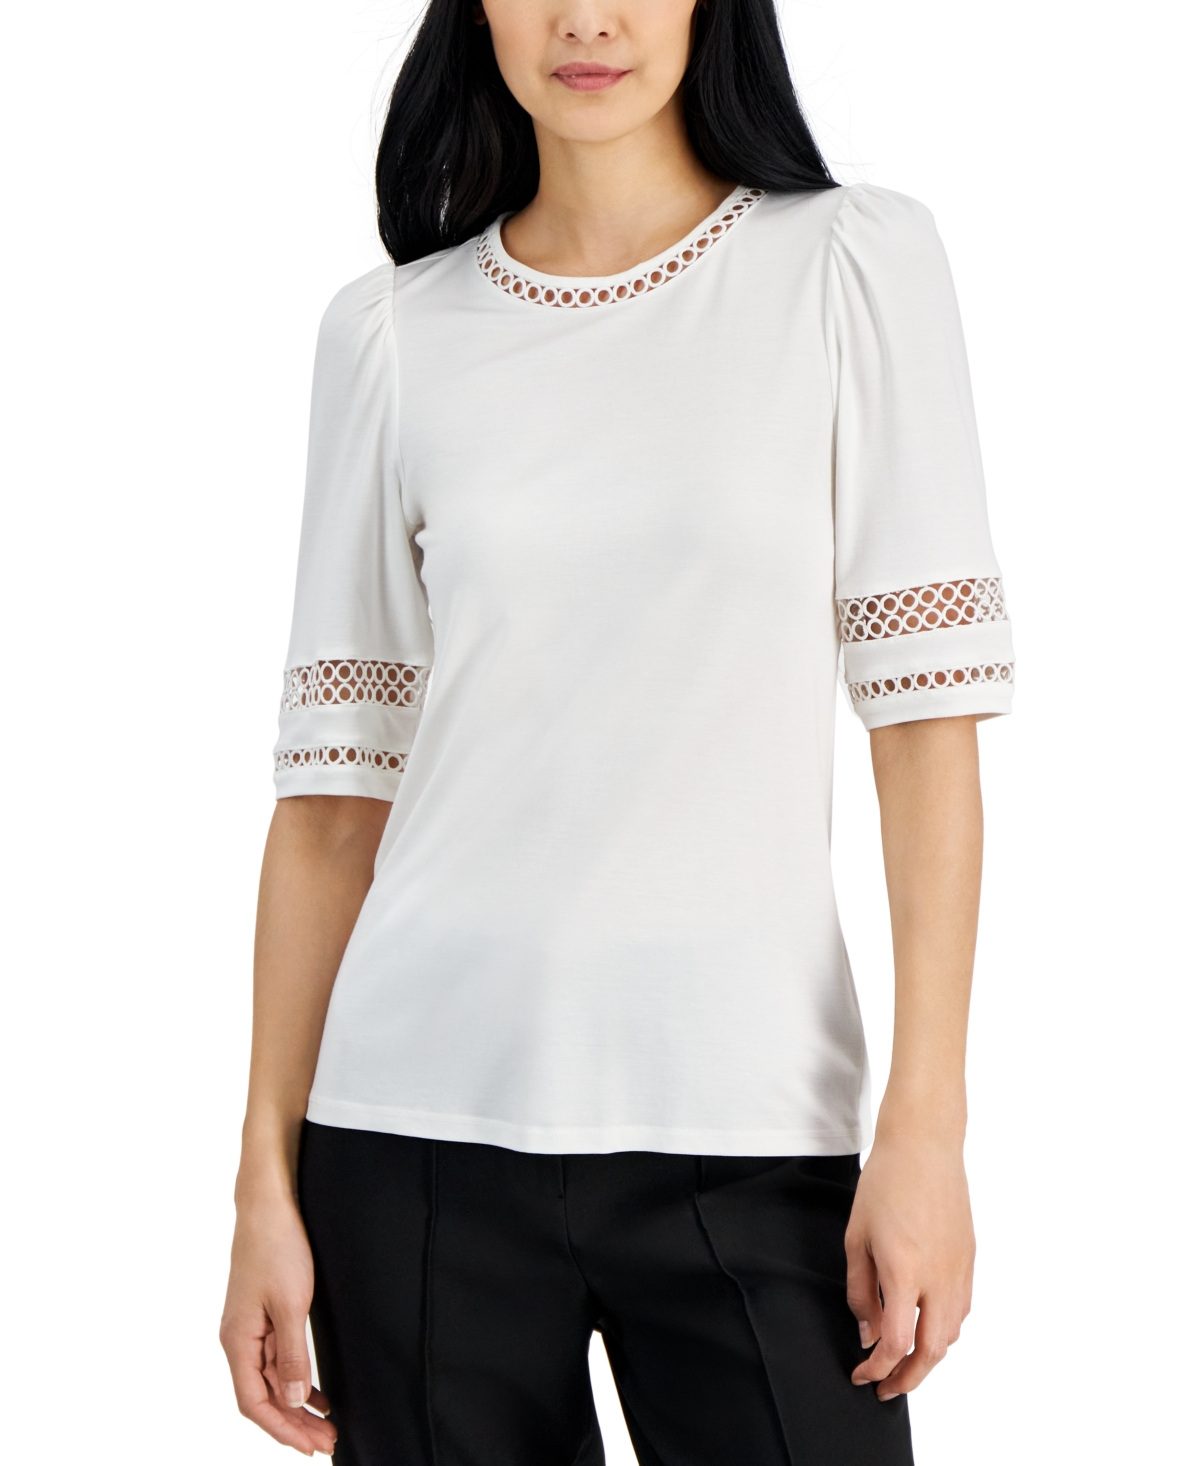 Women's Harmony Lace-Inset Elbow-Sleeve Top - Bright Whi